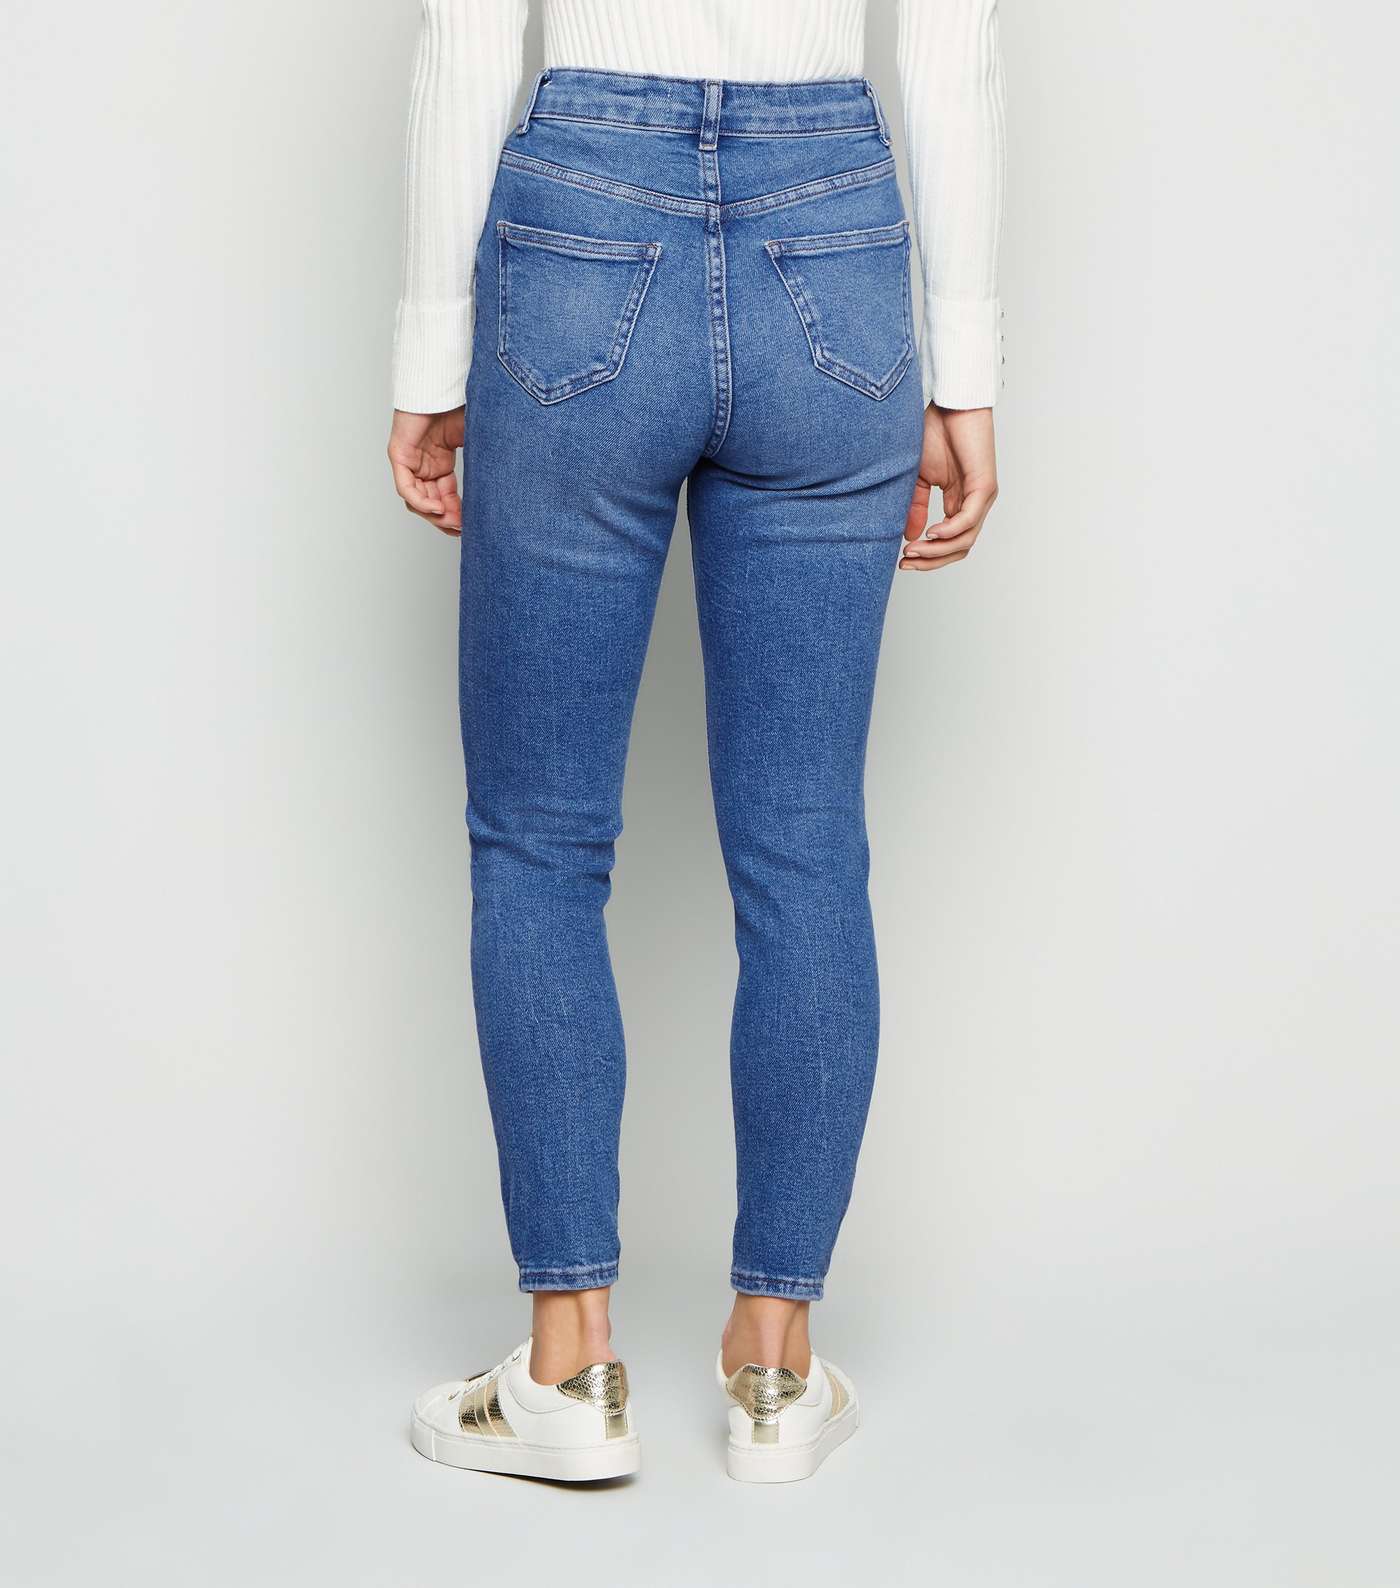 Petite Bright Blue Ripped High Waist Jeans Image 3